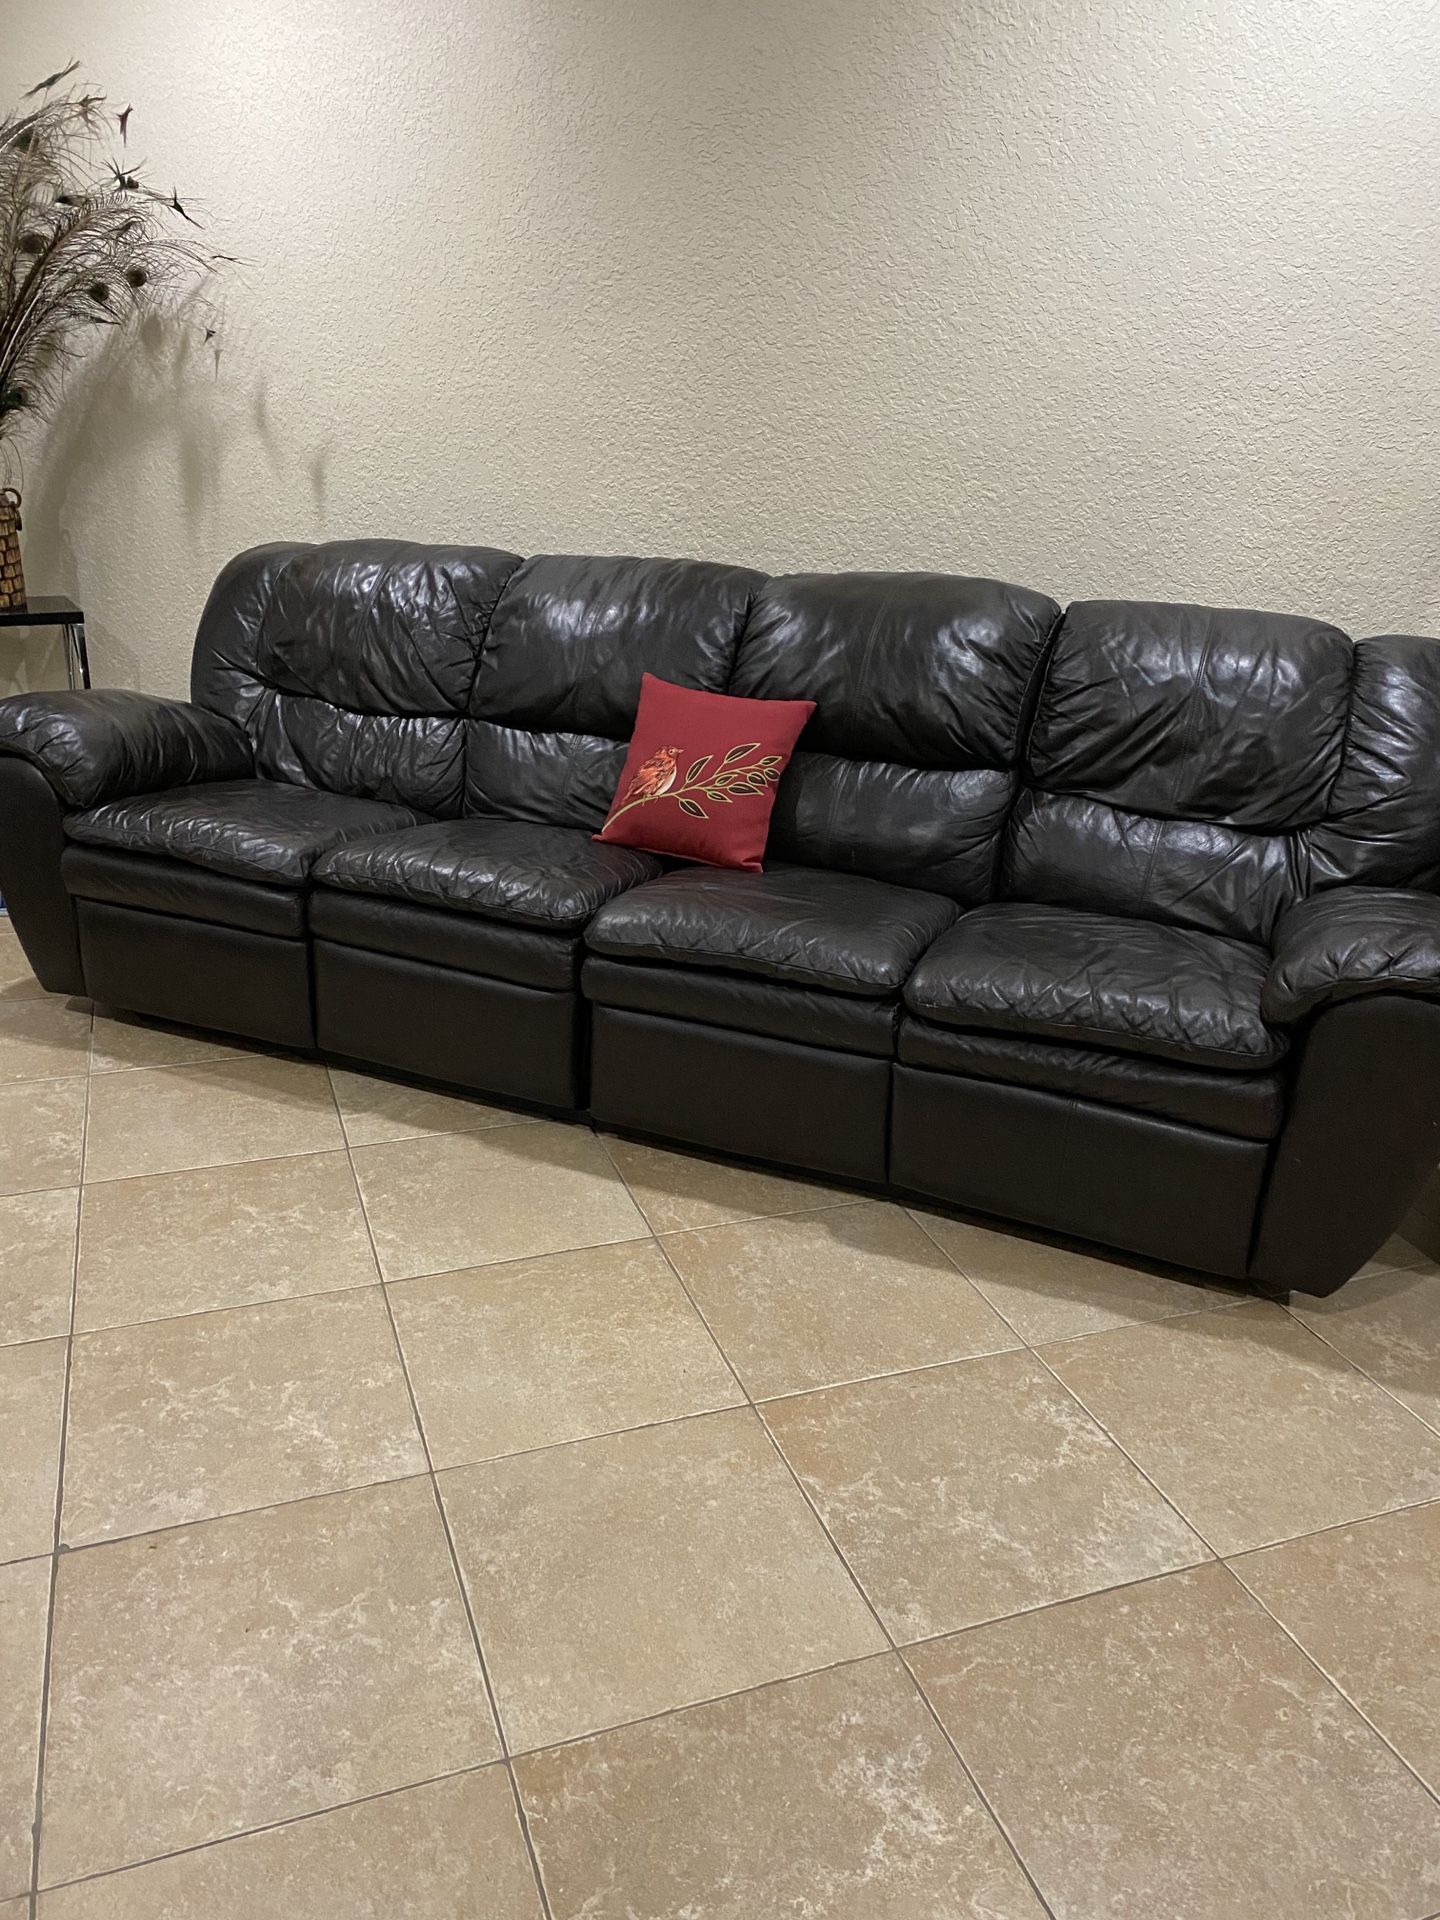 Genuine leather sectional recliner couch